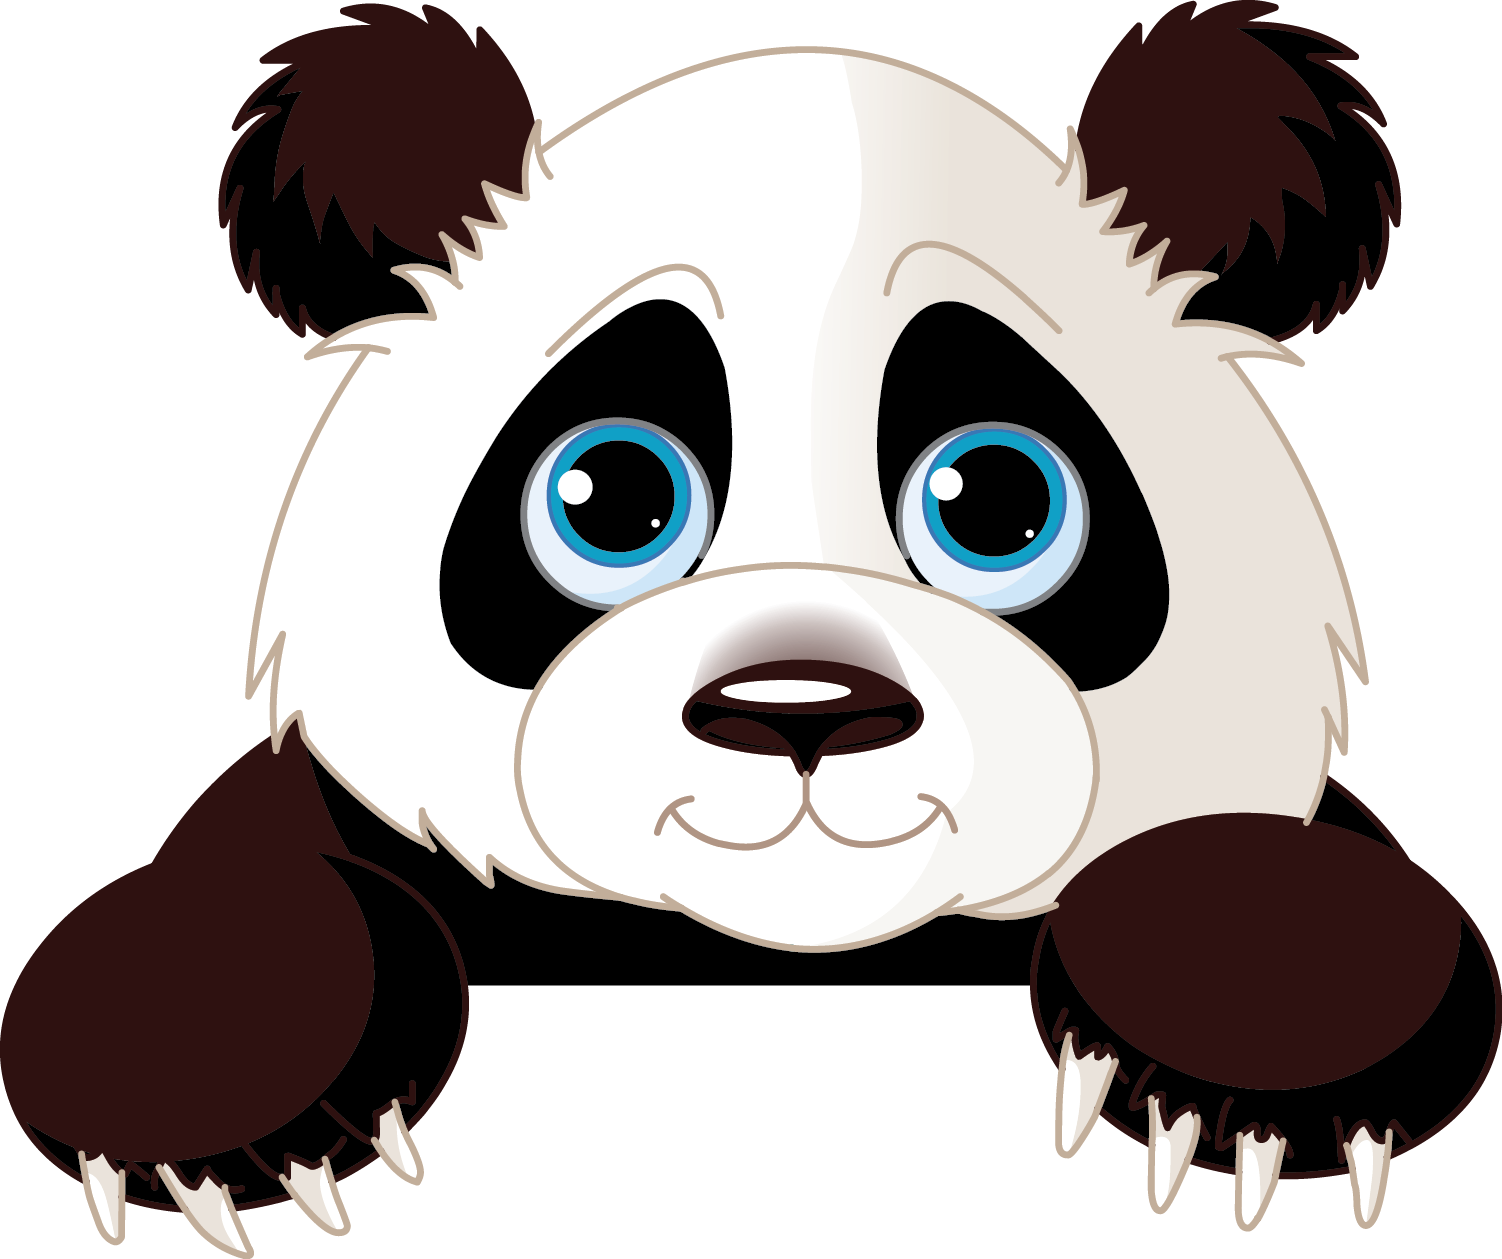 Content Giant Vector Panda PNG Image High Quality Clipart